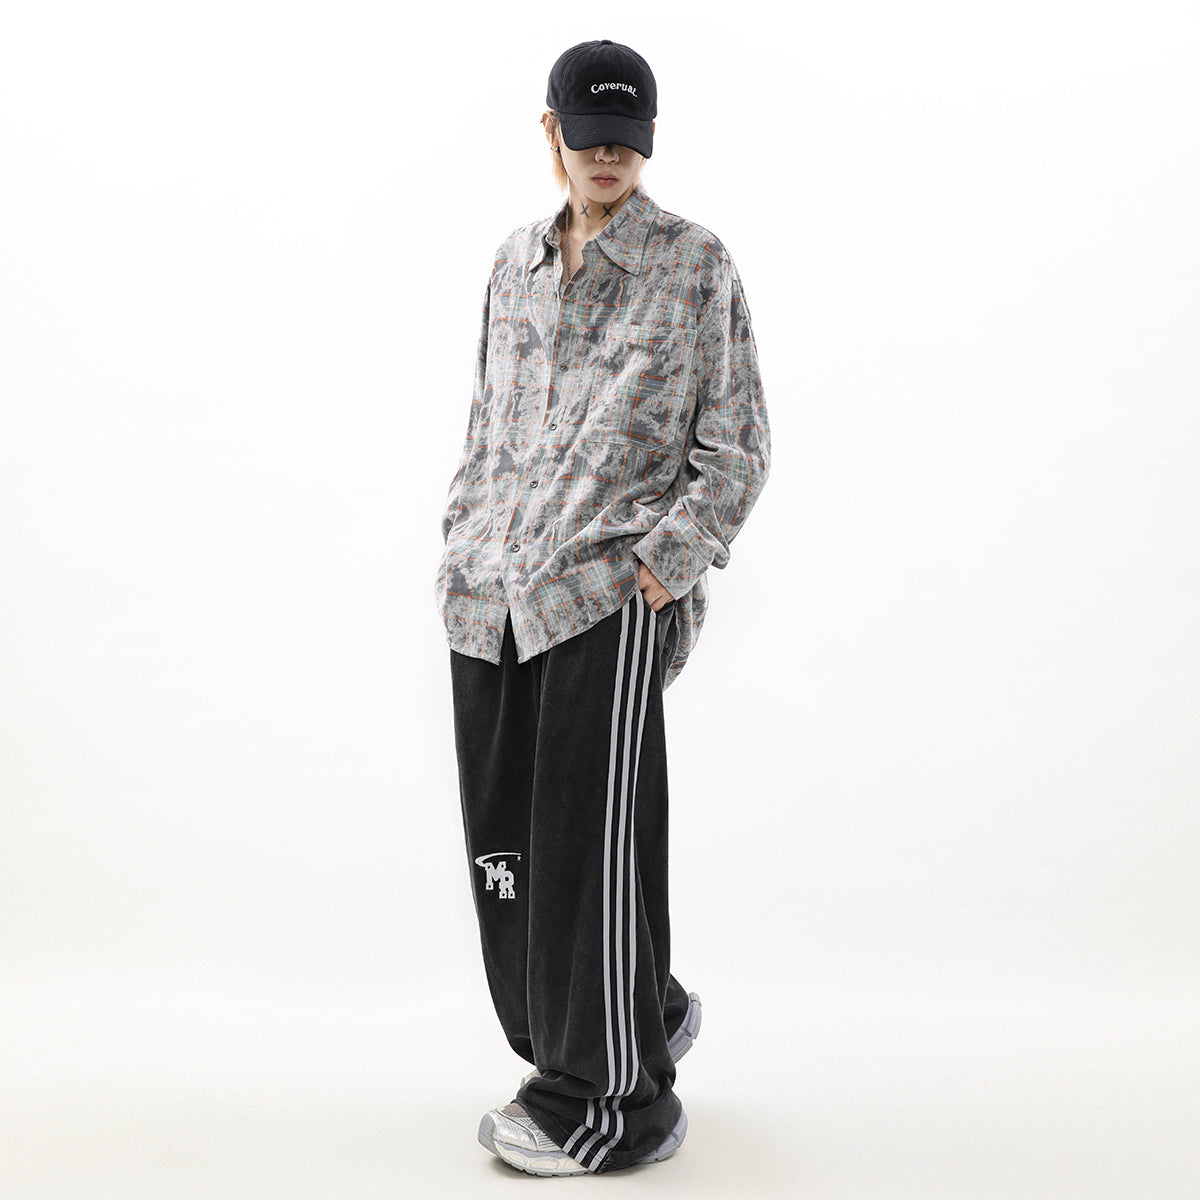 Mr Nearly Casual Plaid Long Sleeve Shirt Korean Street Fashion Shirt By Mr Nearly Shop Online at OH Vault